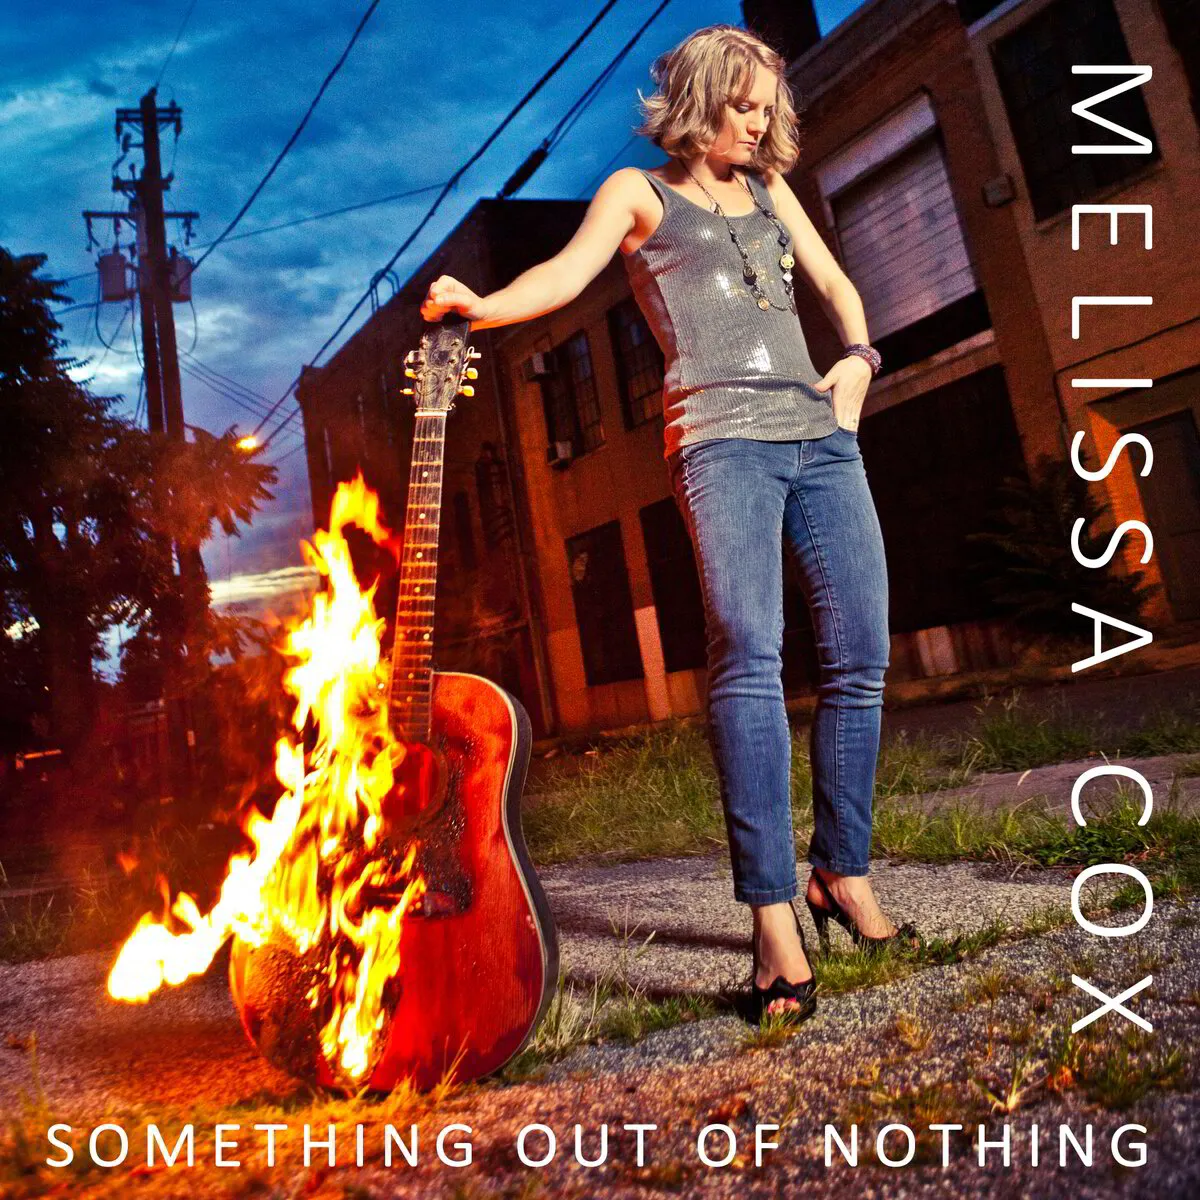 CD - "Something Out of Nothing" - The Best of Melissa Cox